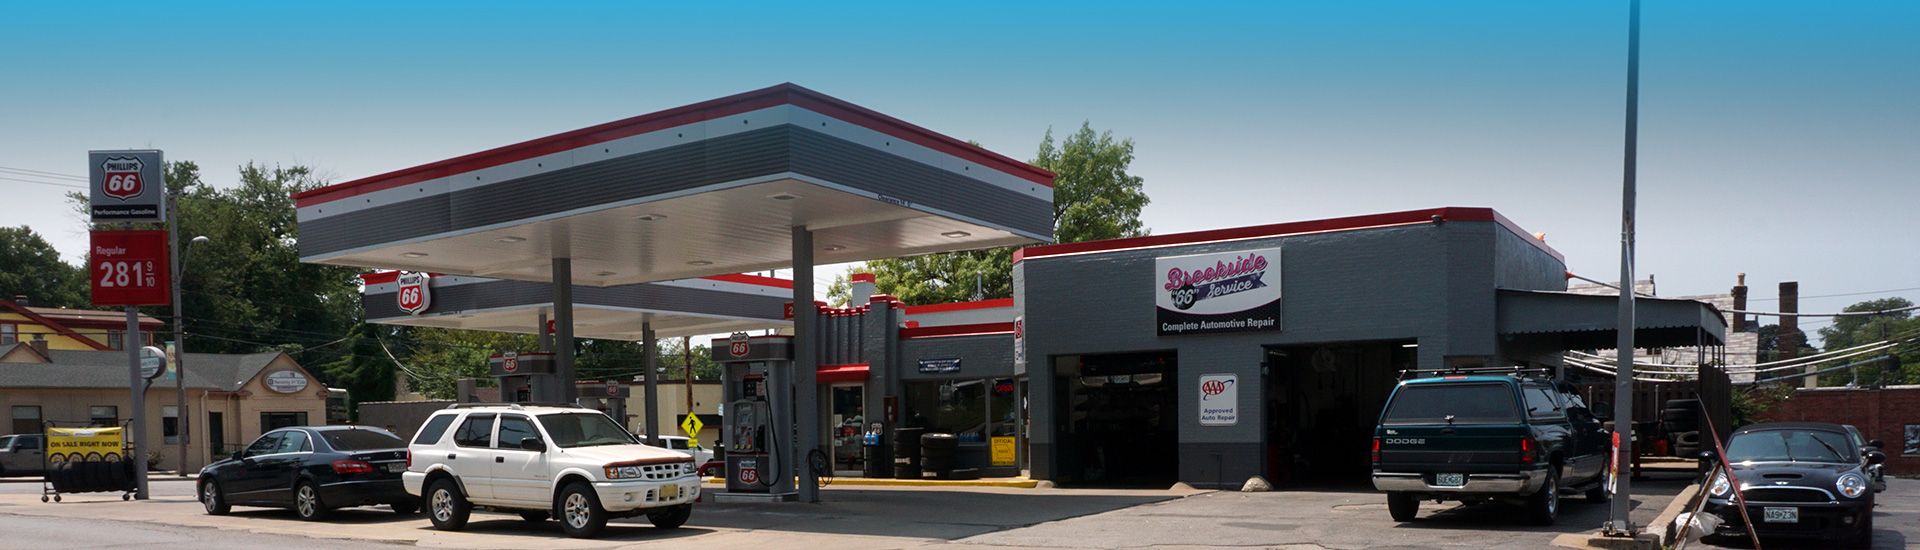 exterior painting project for gas station